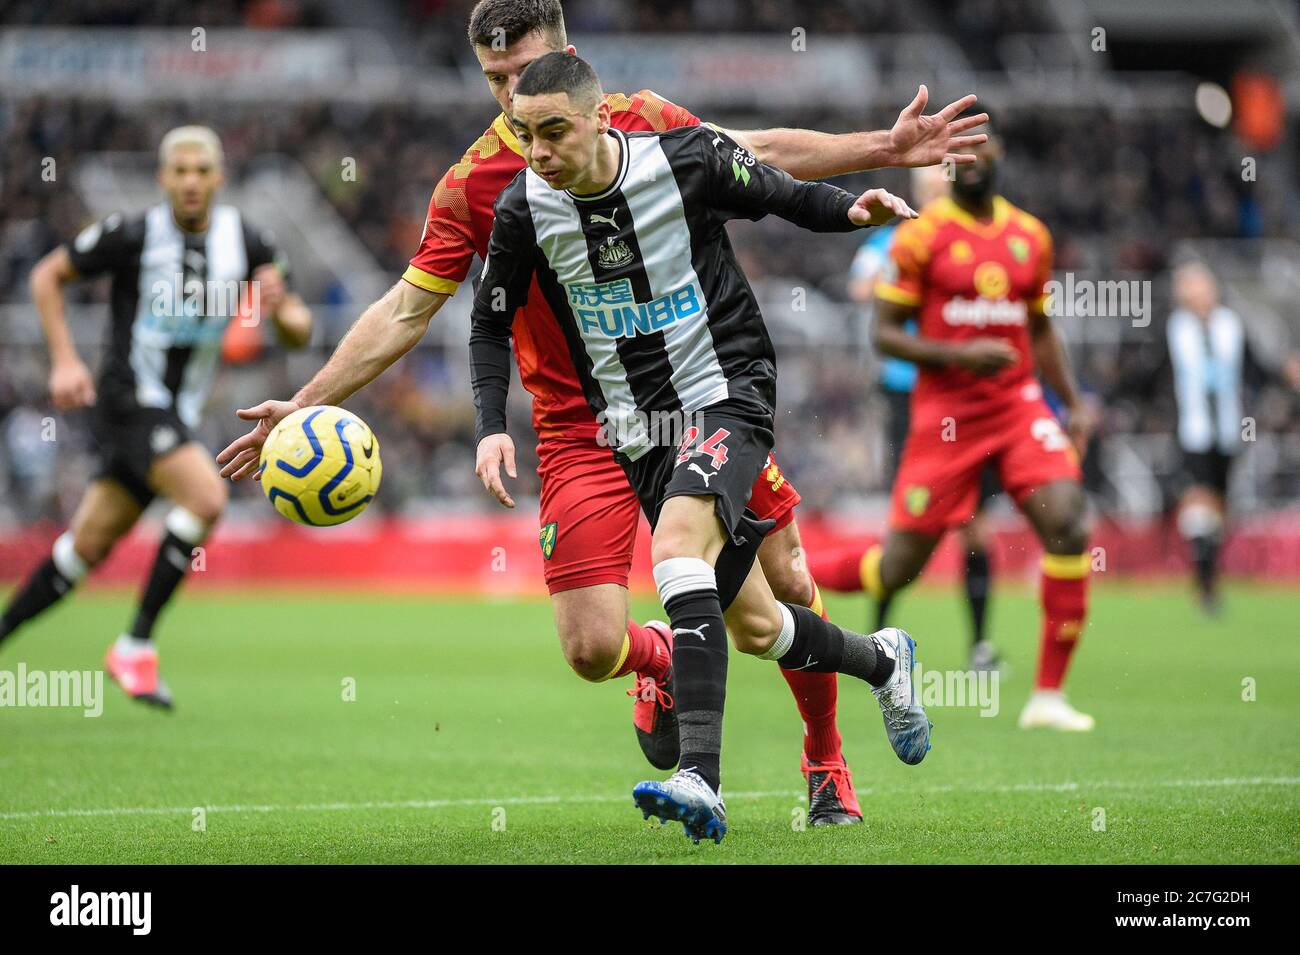 1st February 2020, St. James's Park, Newcastle, England; Premier League, Newcastle United v Norwich City : Miguel Almirón (24) of Newcastle United under pressure from Grant Hanley (5) of Norwich City Stock Photo